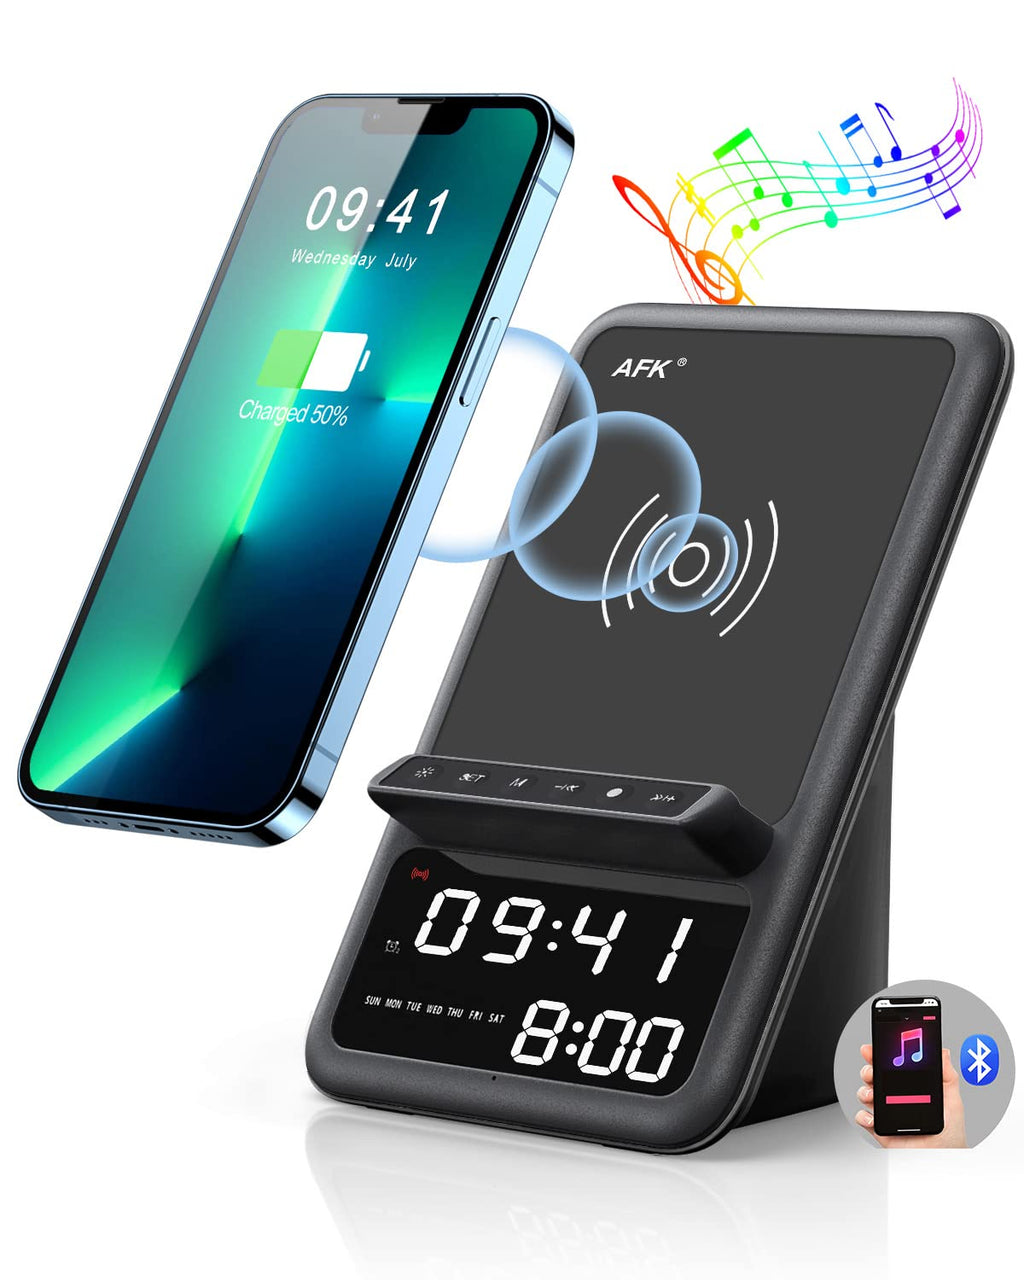  [AUSTRALIA] - Wireless Charger for iPhone/Samsung,AFK 4 in 1 Charging Station with Bluetooth Speaker,Alarm Clock,Hands-Free Calling,Compatible with iPhone 13/12/11/Pro Max/XR/X/8 Plus,Samsung and More(Black) Black-B02